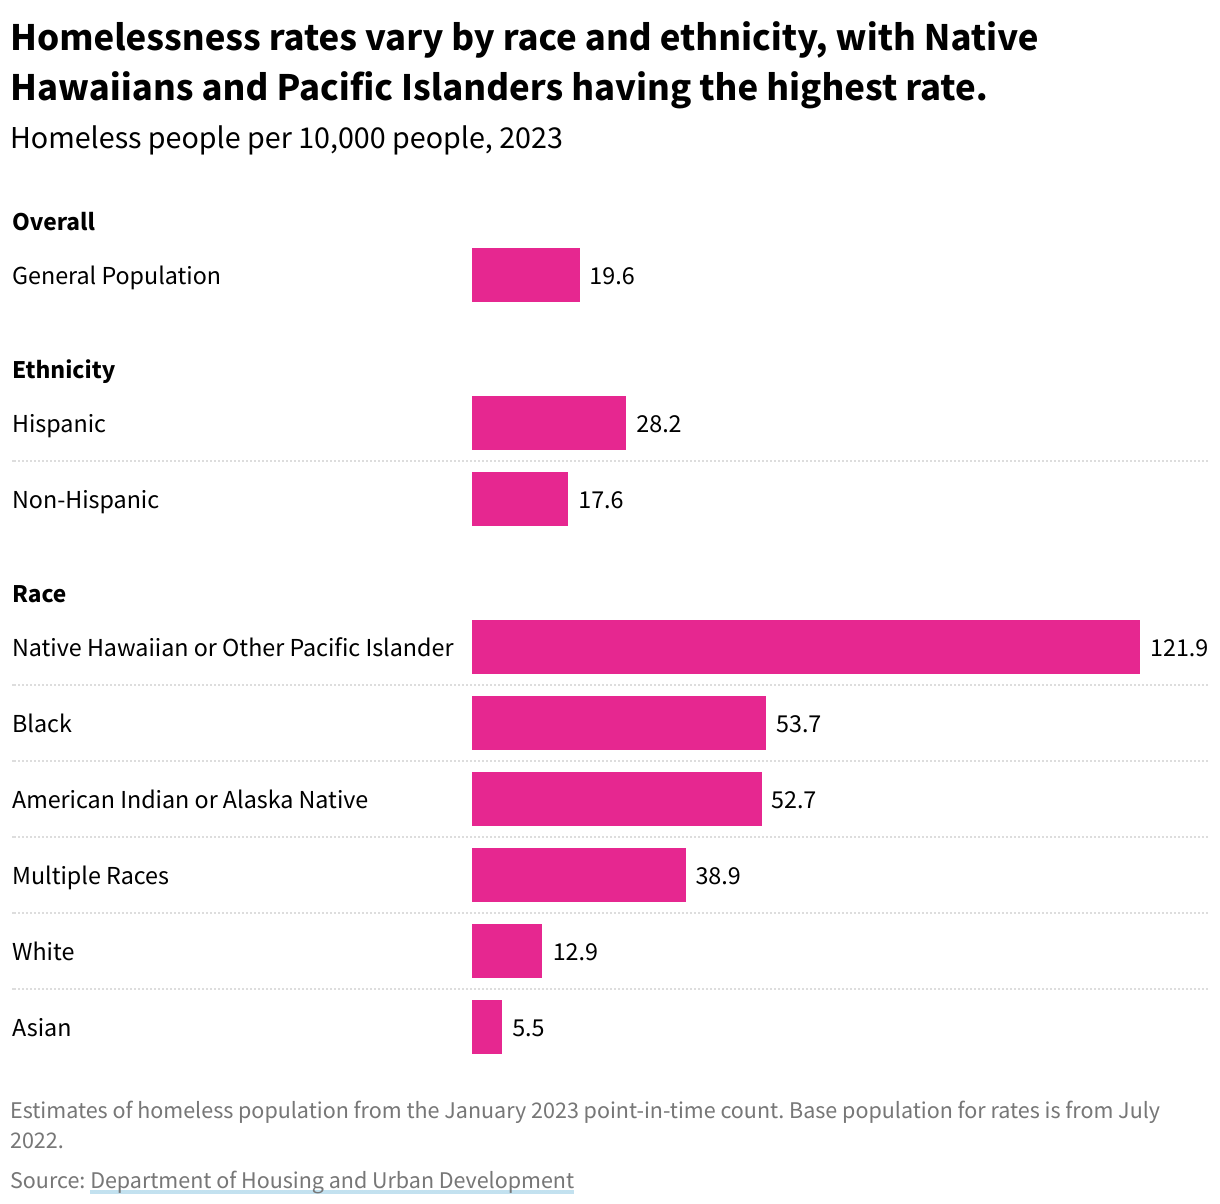 A grouped bar chart showing homeless people per 10,000 people by race in 2023. Native Hawaiians and Pacific Islanders have the highest rate.